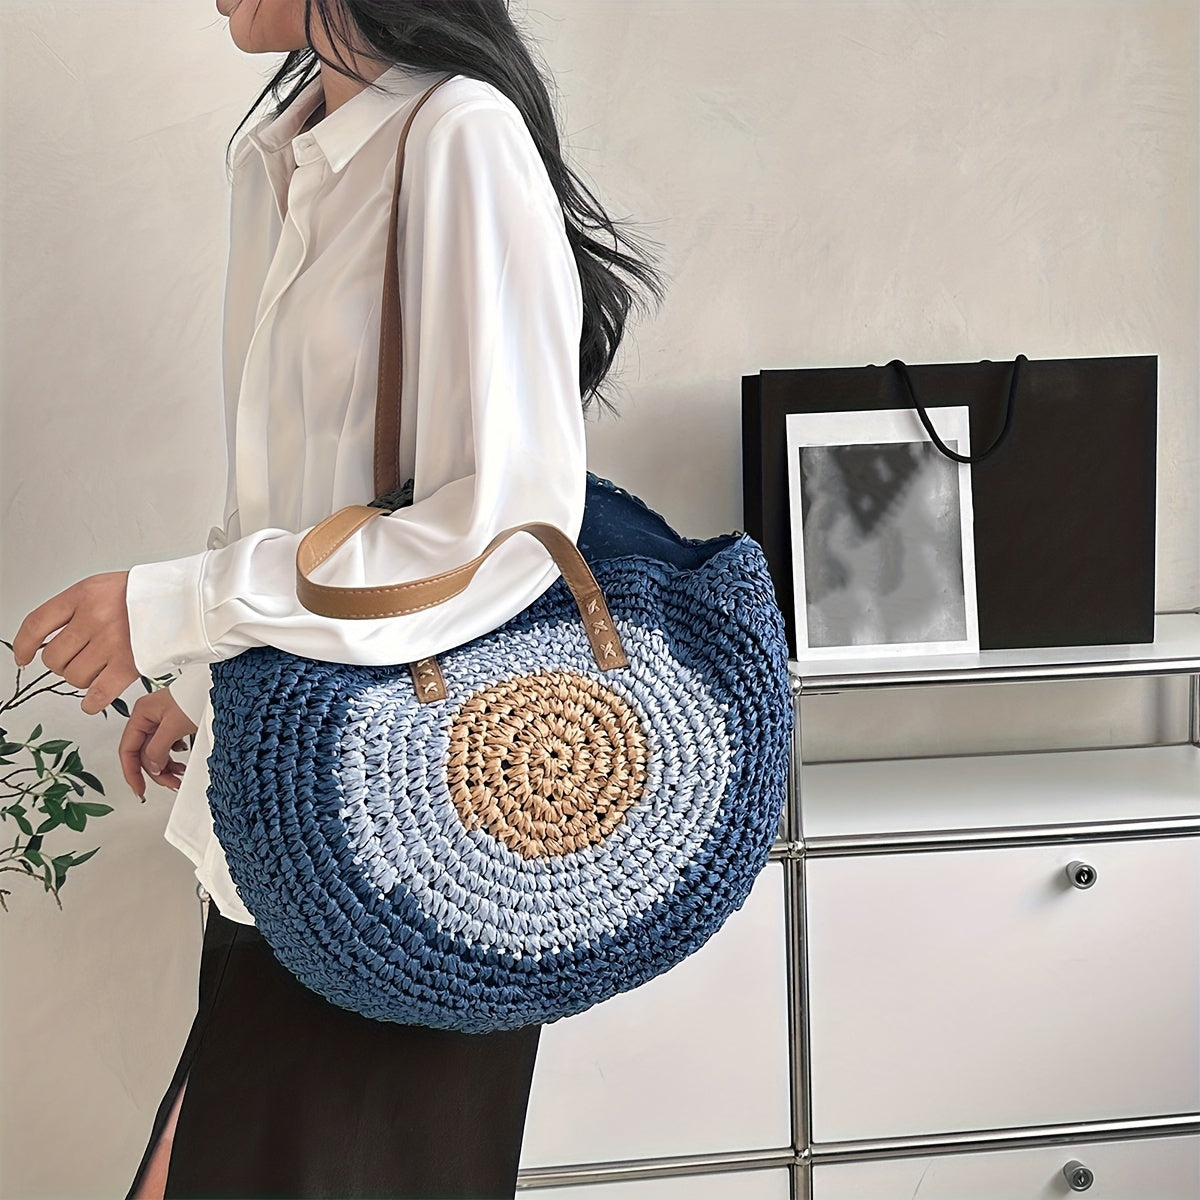 Woven Straw Round Handbags, Hollow Out Summer Beach Bag, Women's Large Capacity Shoulder Bag